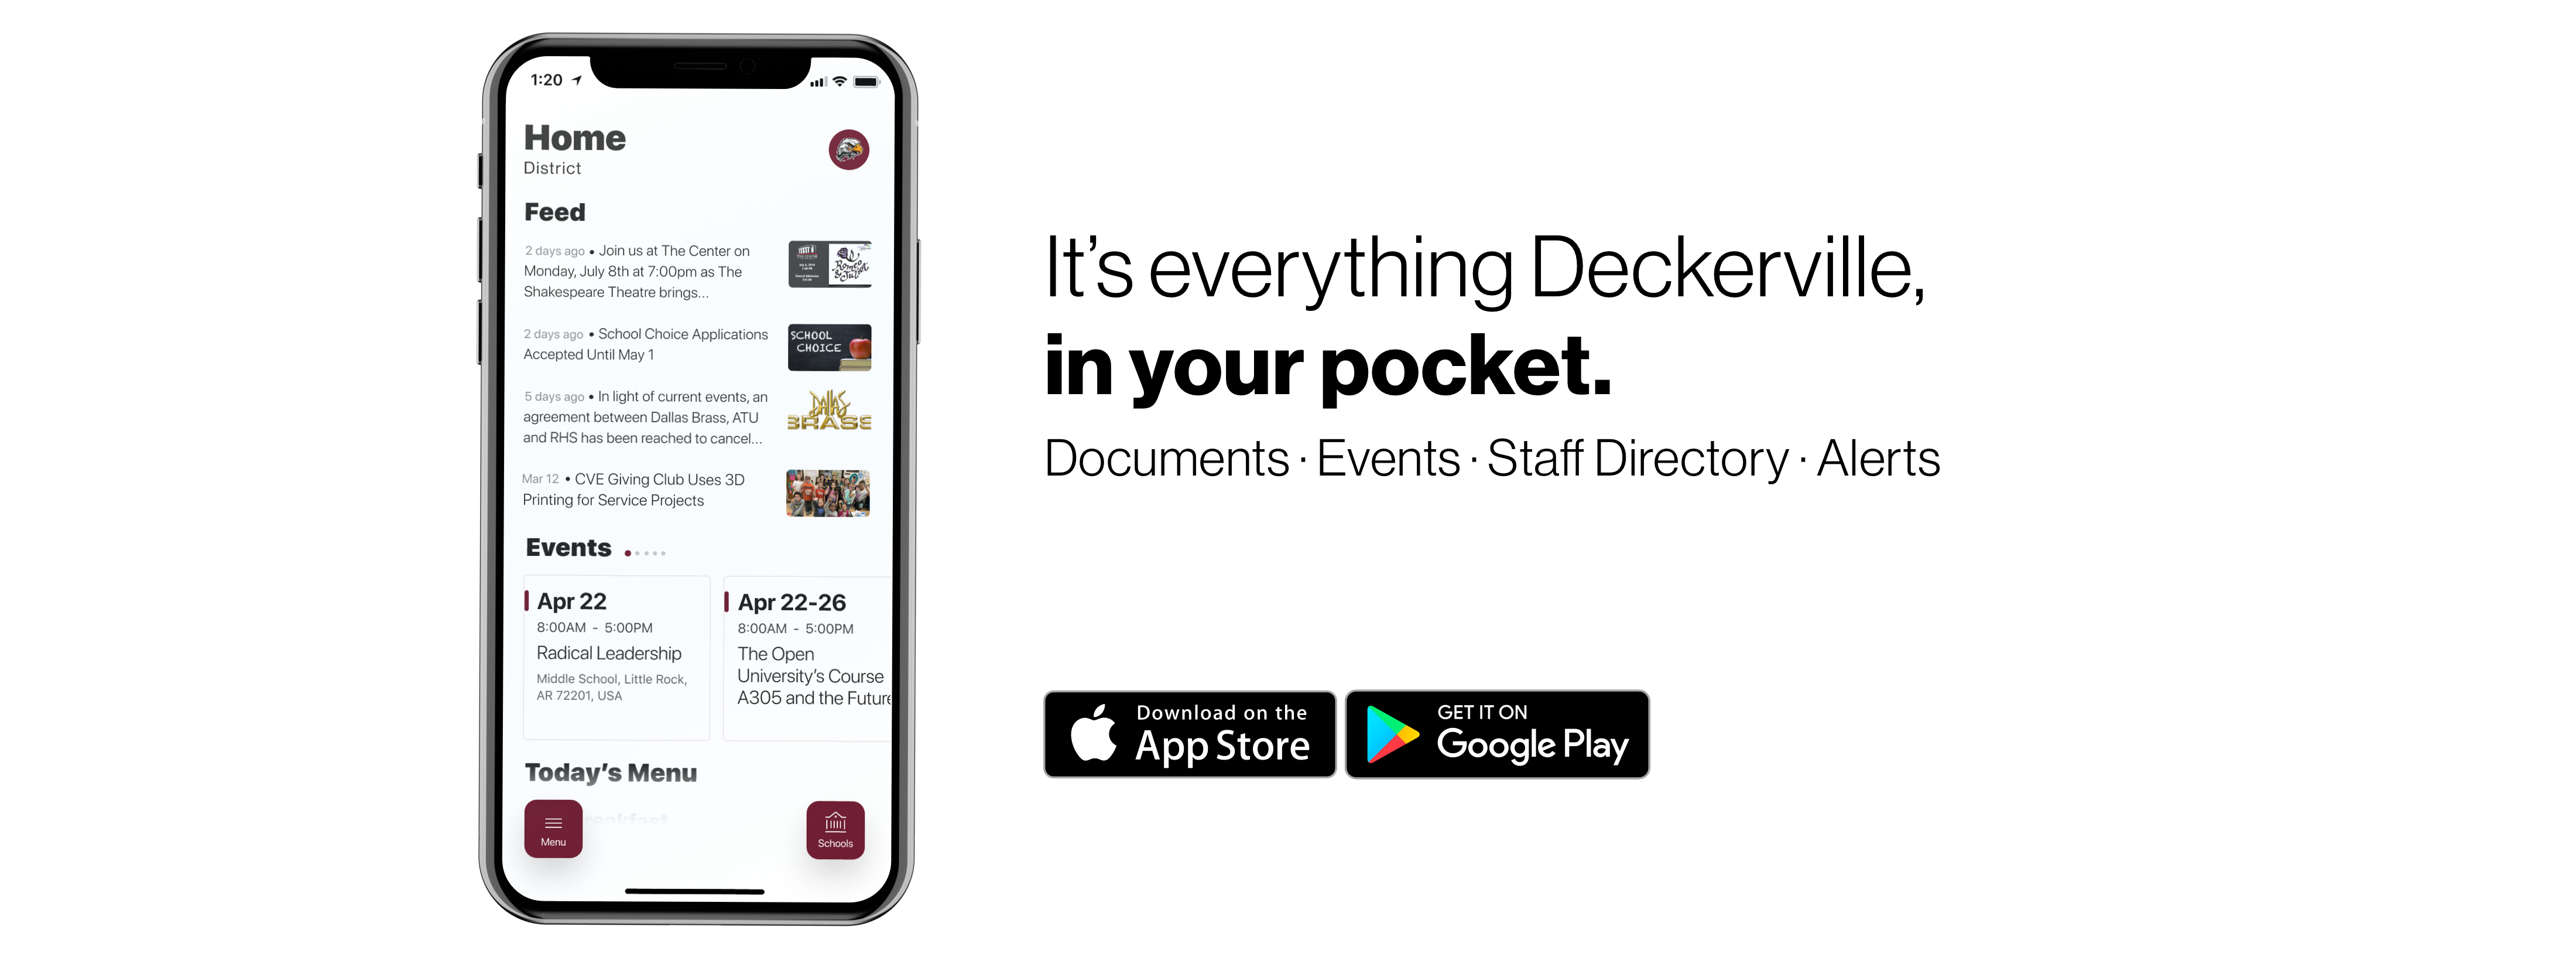 Everything Deckerville in your pocket